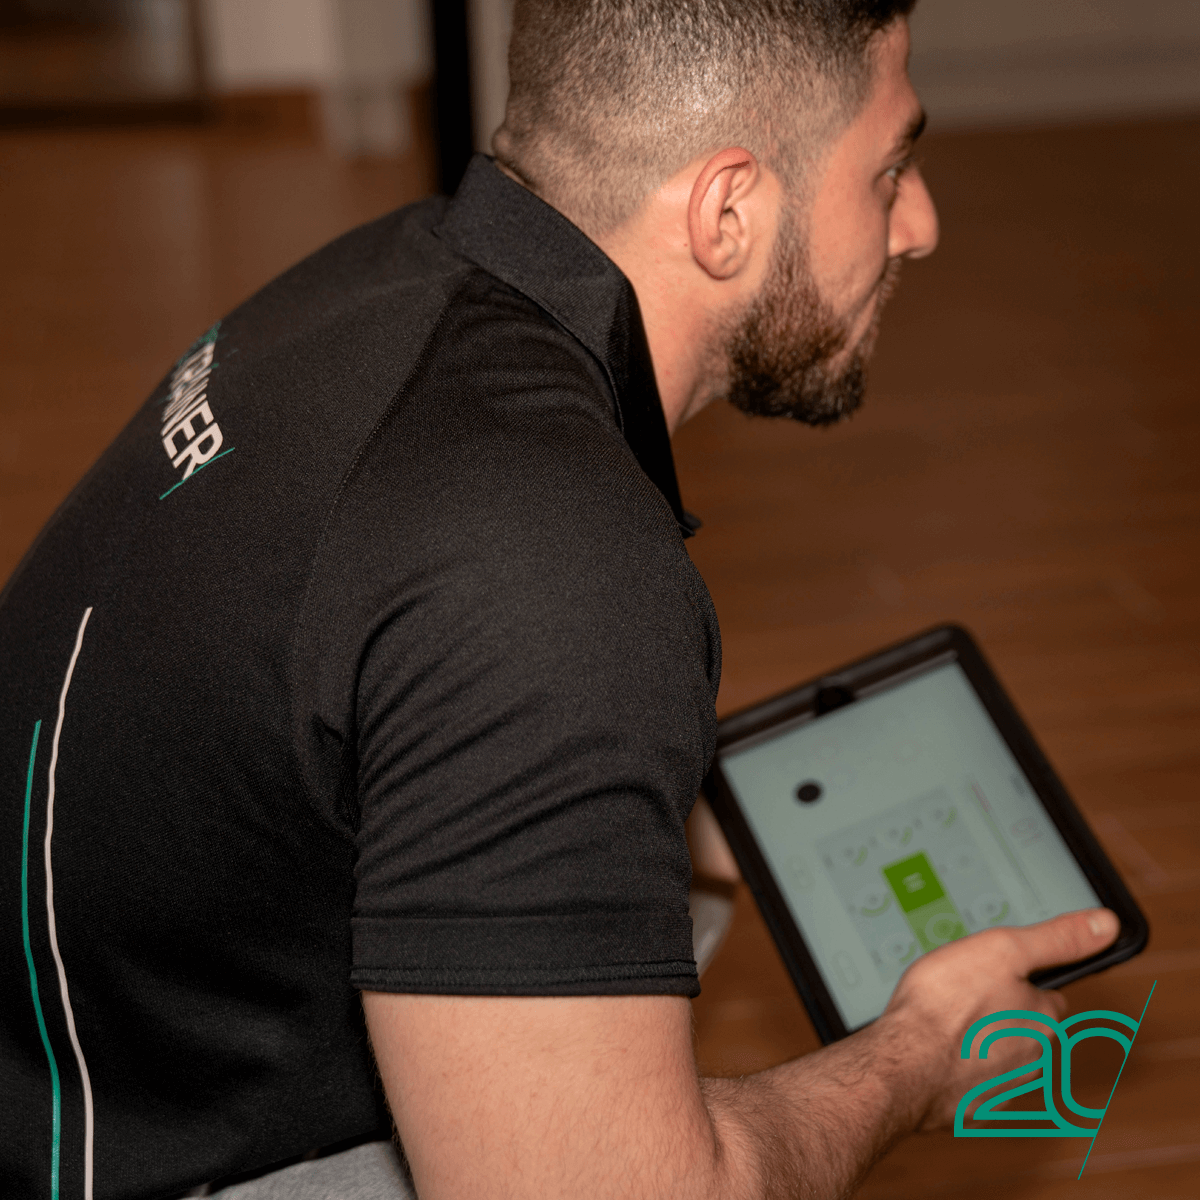 What You Need to Know About Electrical Muscle Stimulation